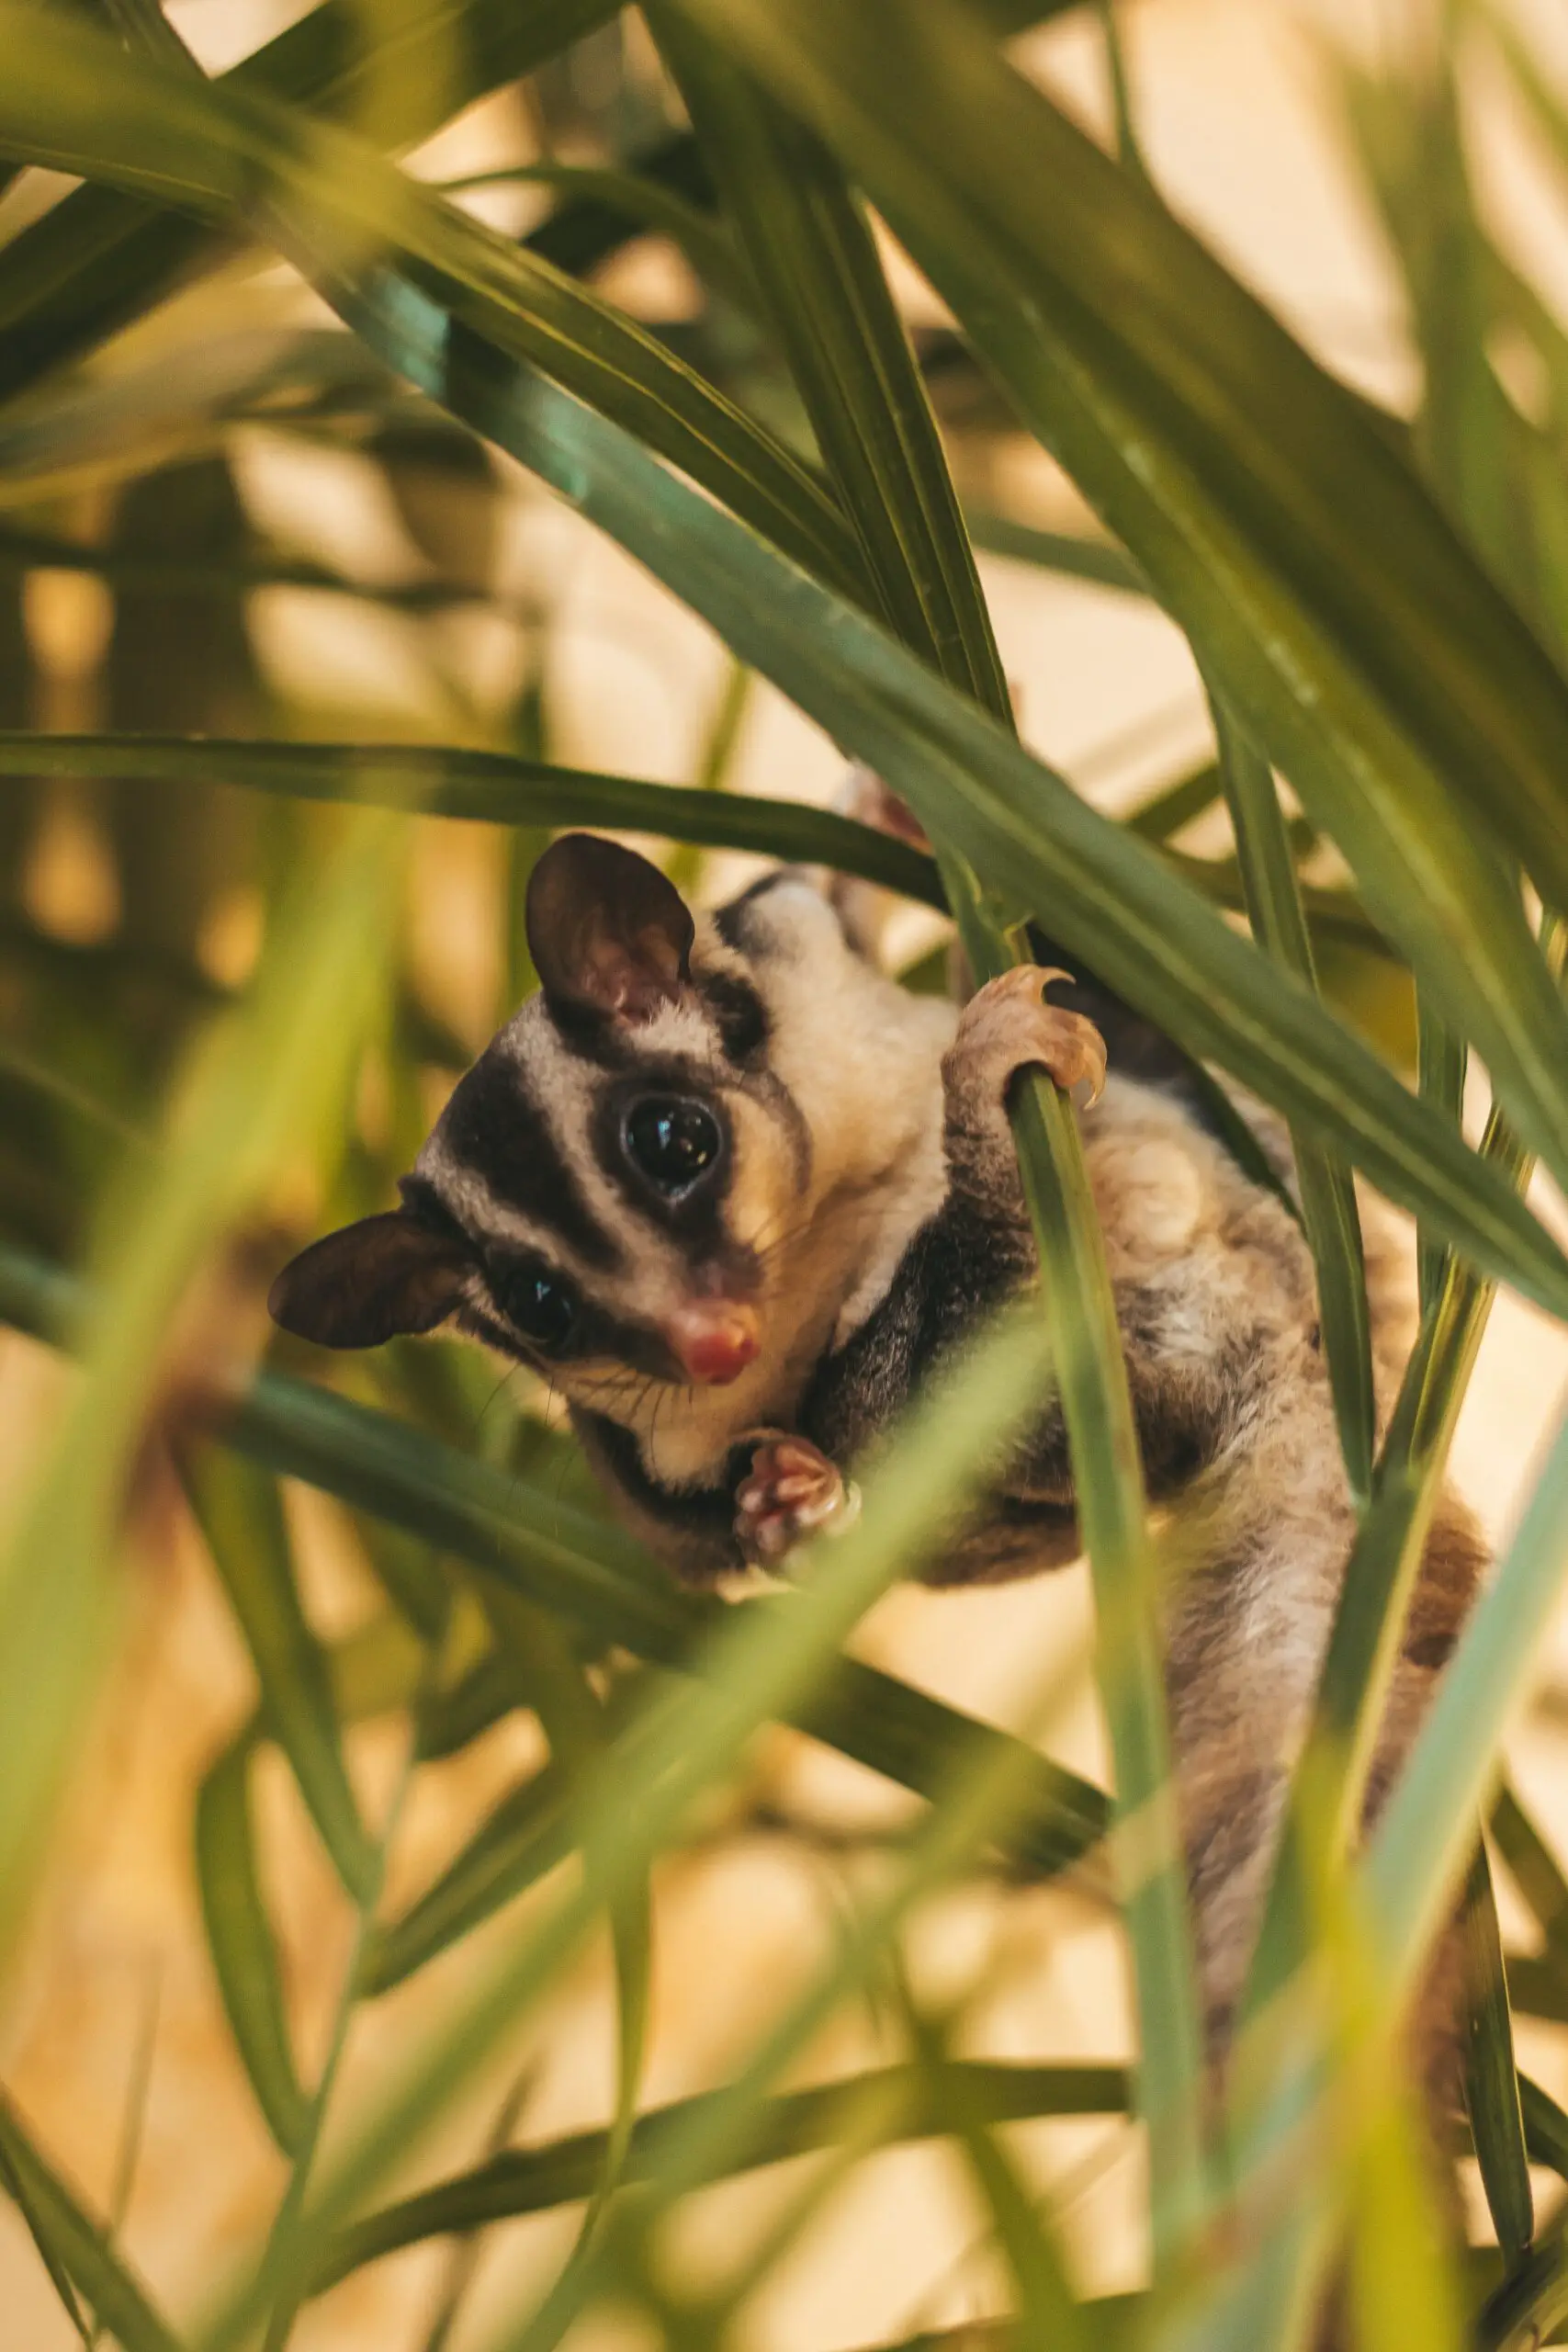 Where Do Sugar Gliders Like to Be Pet? Do They Even Want To?